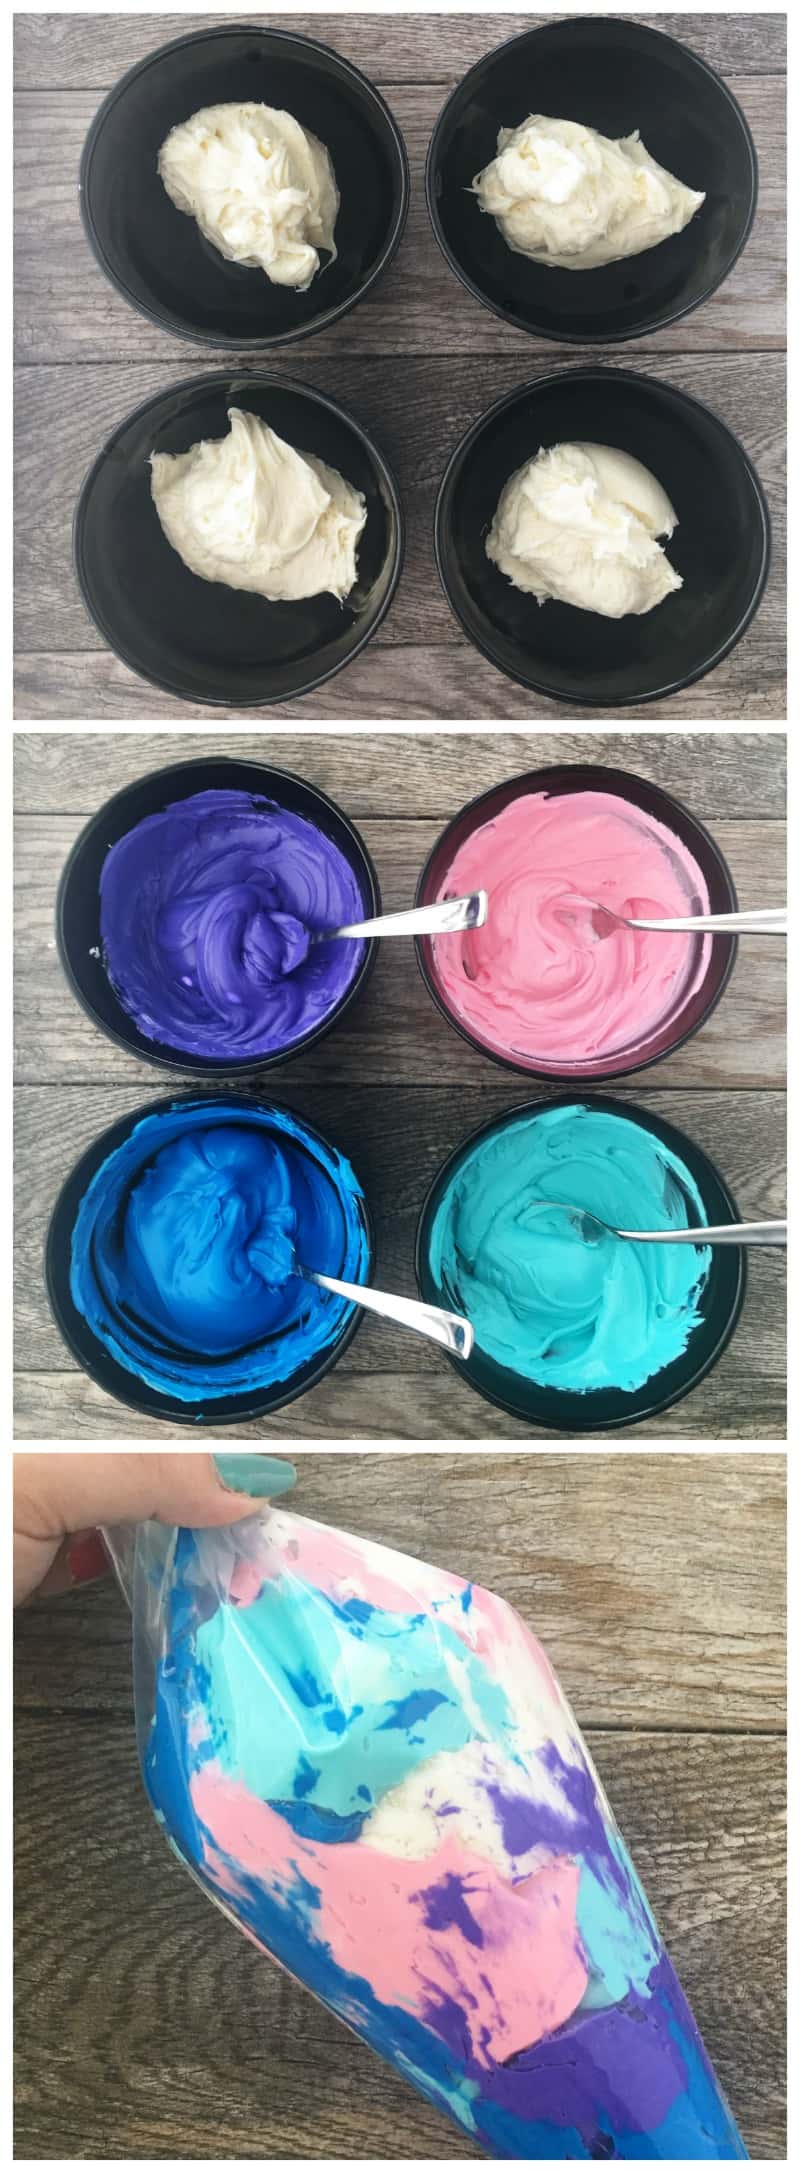 For a more advanced cupcake, you can create galaxy frosting using regular Pillsbury Creamy Supreme® Vanilla Flavored Frosting and food coloring! You will need half a can of frosting per color. I had five colors (including white) so I used three cans.